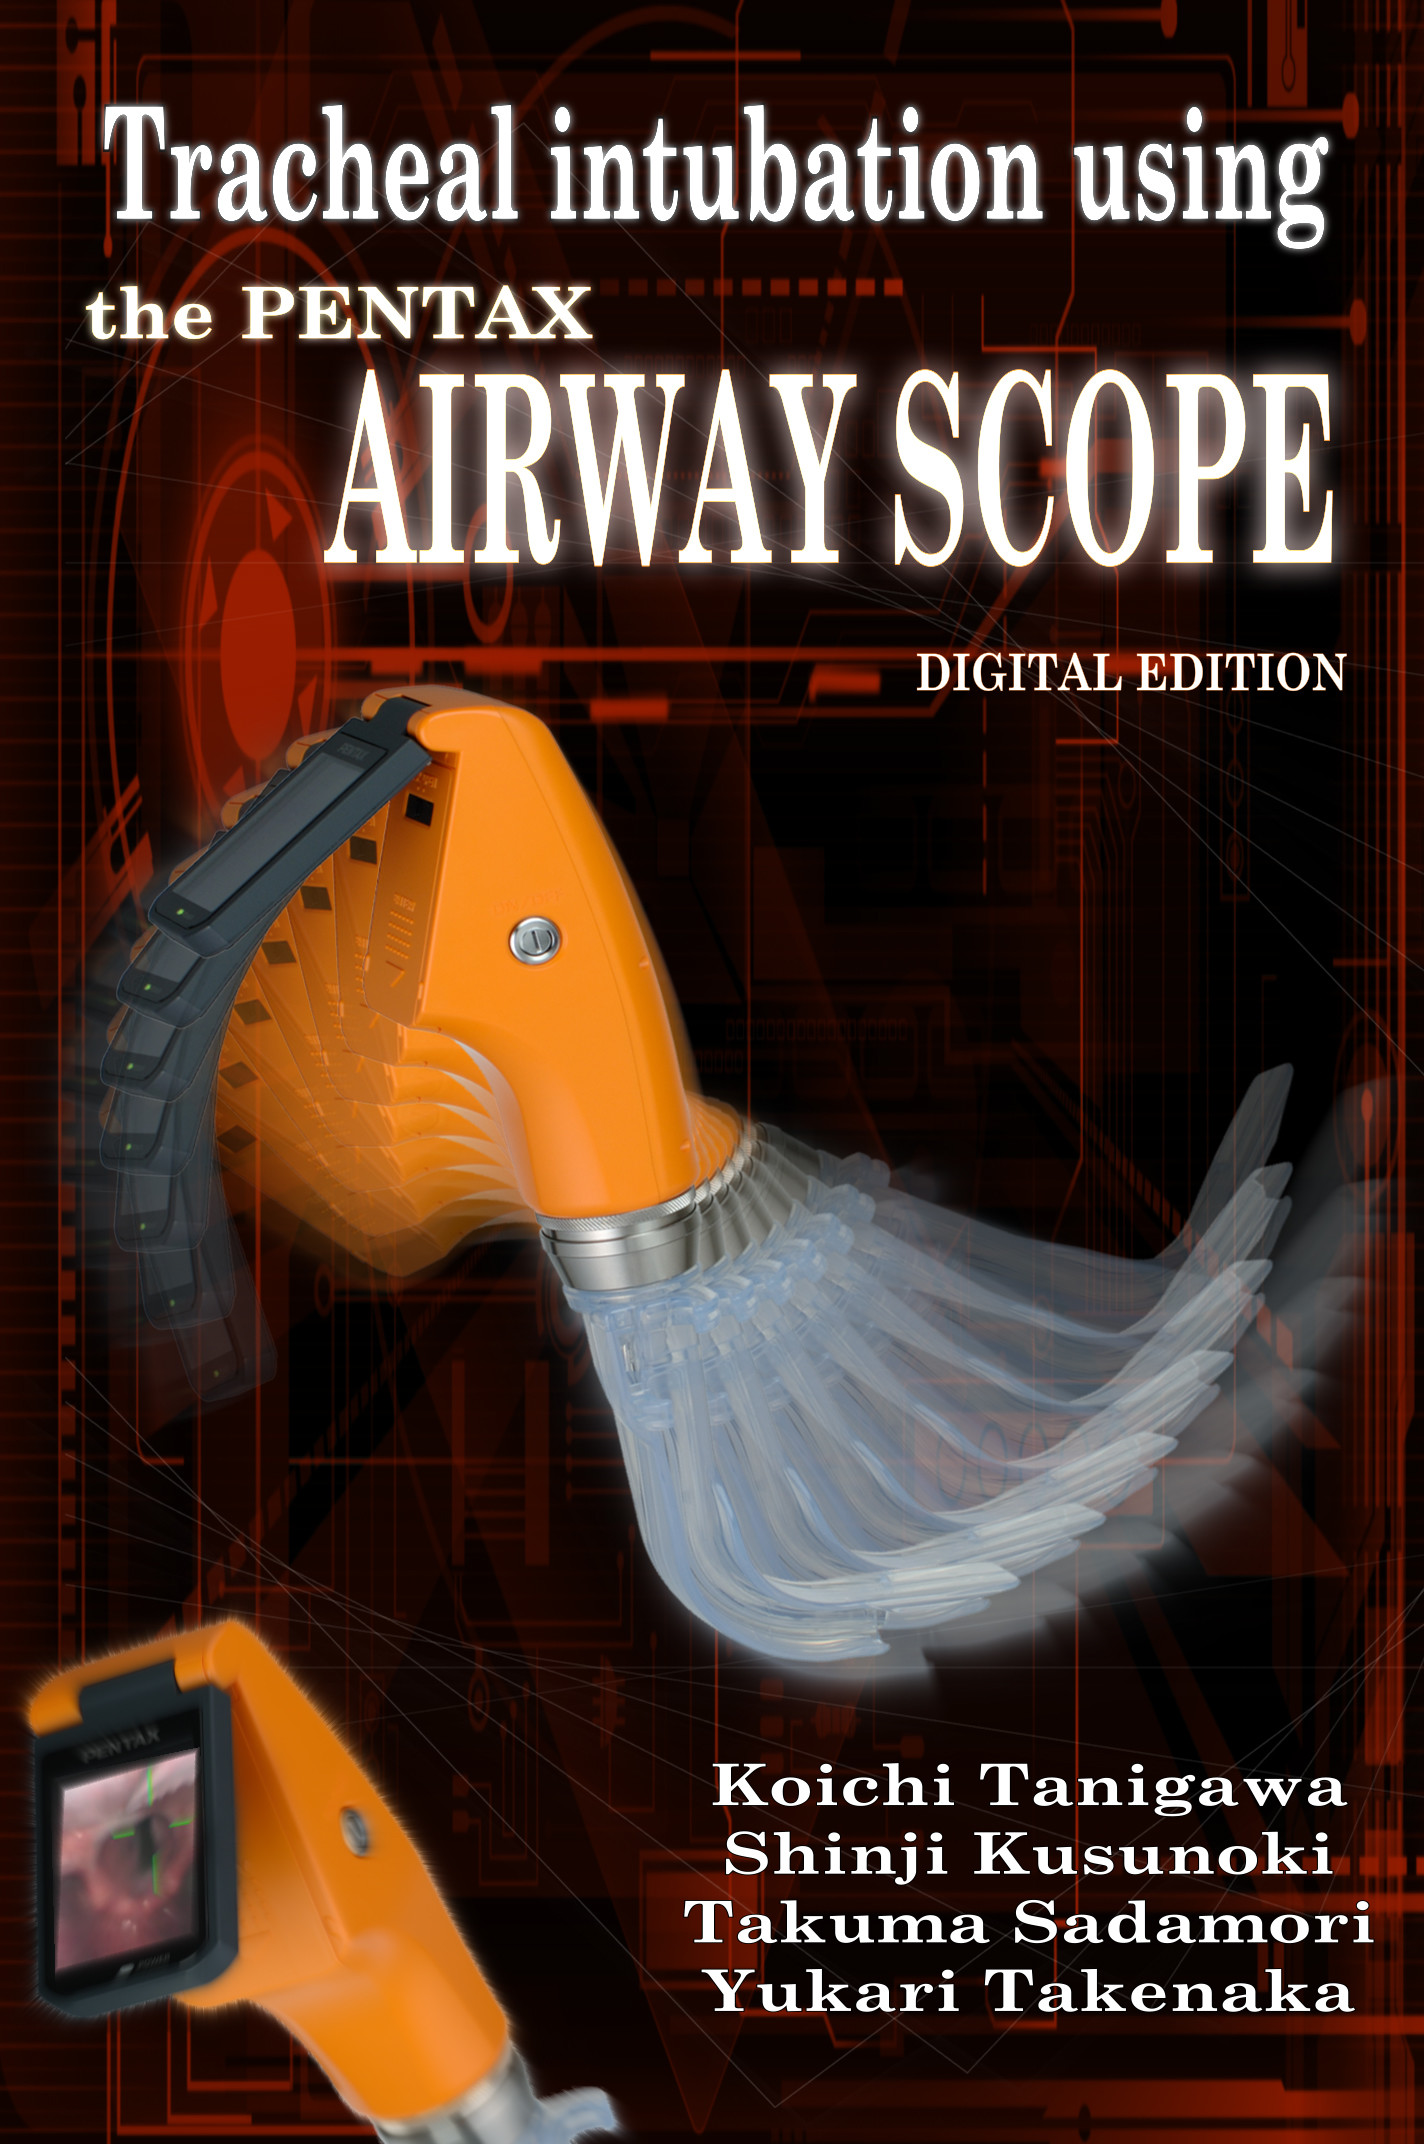 Tracheal intubation using the PENTAX Airway Scope